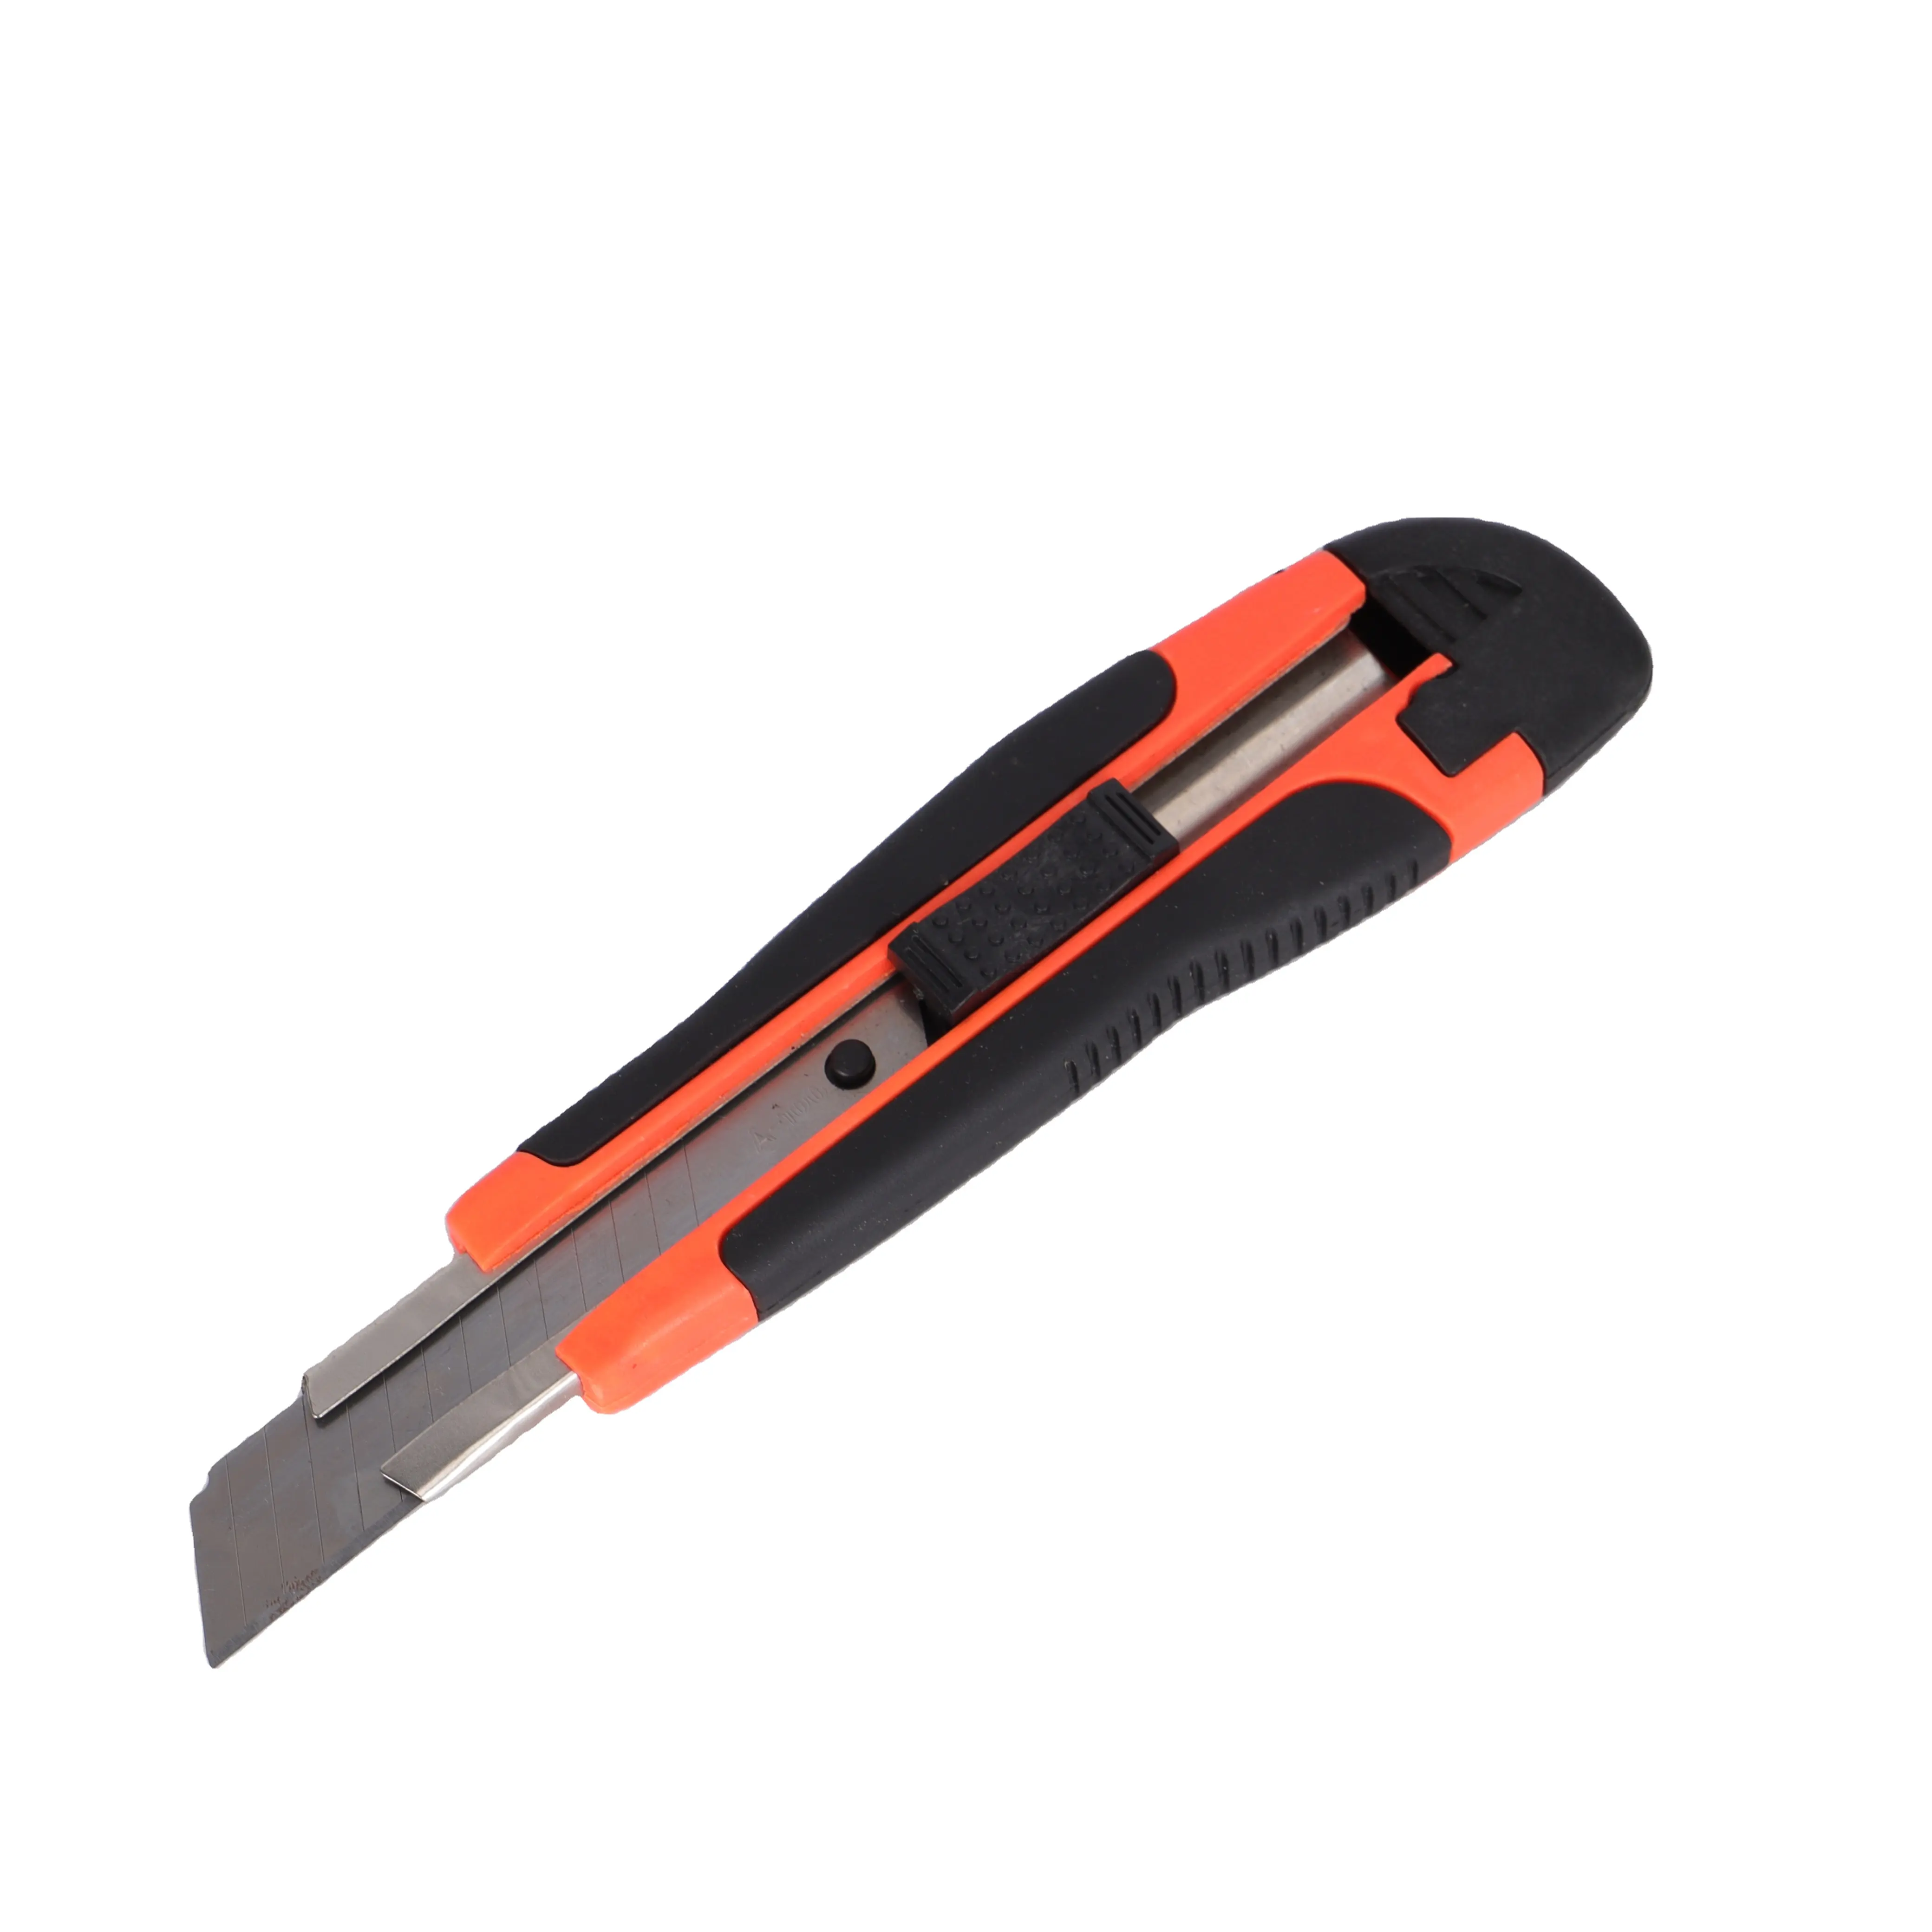 Factory Whole sell Hand Cutter Tools Utility Cutter Fall Resistant Multi Foldable Tool Knife